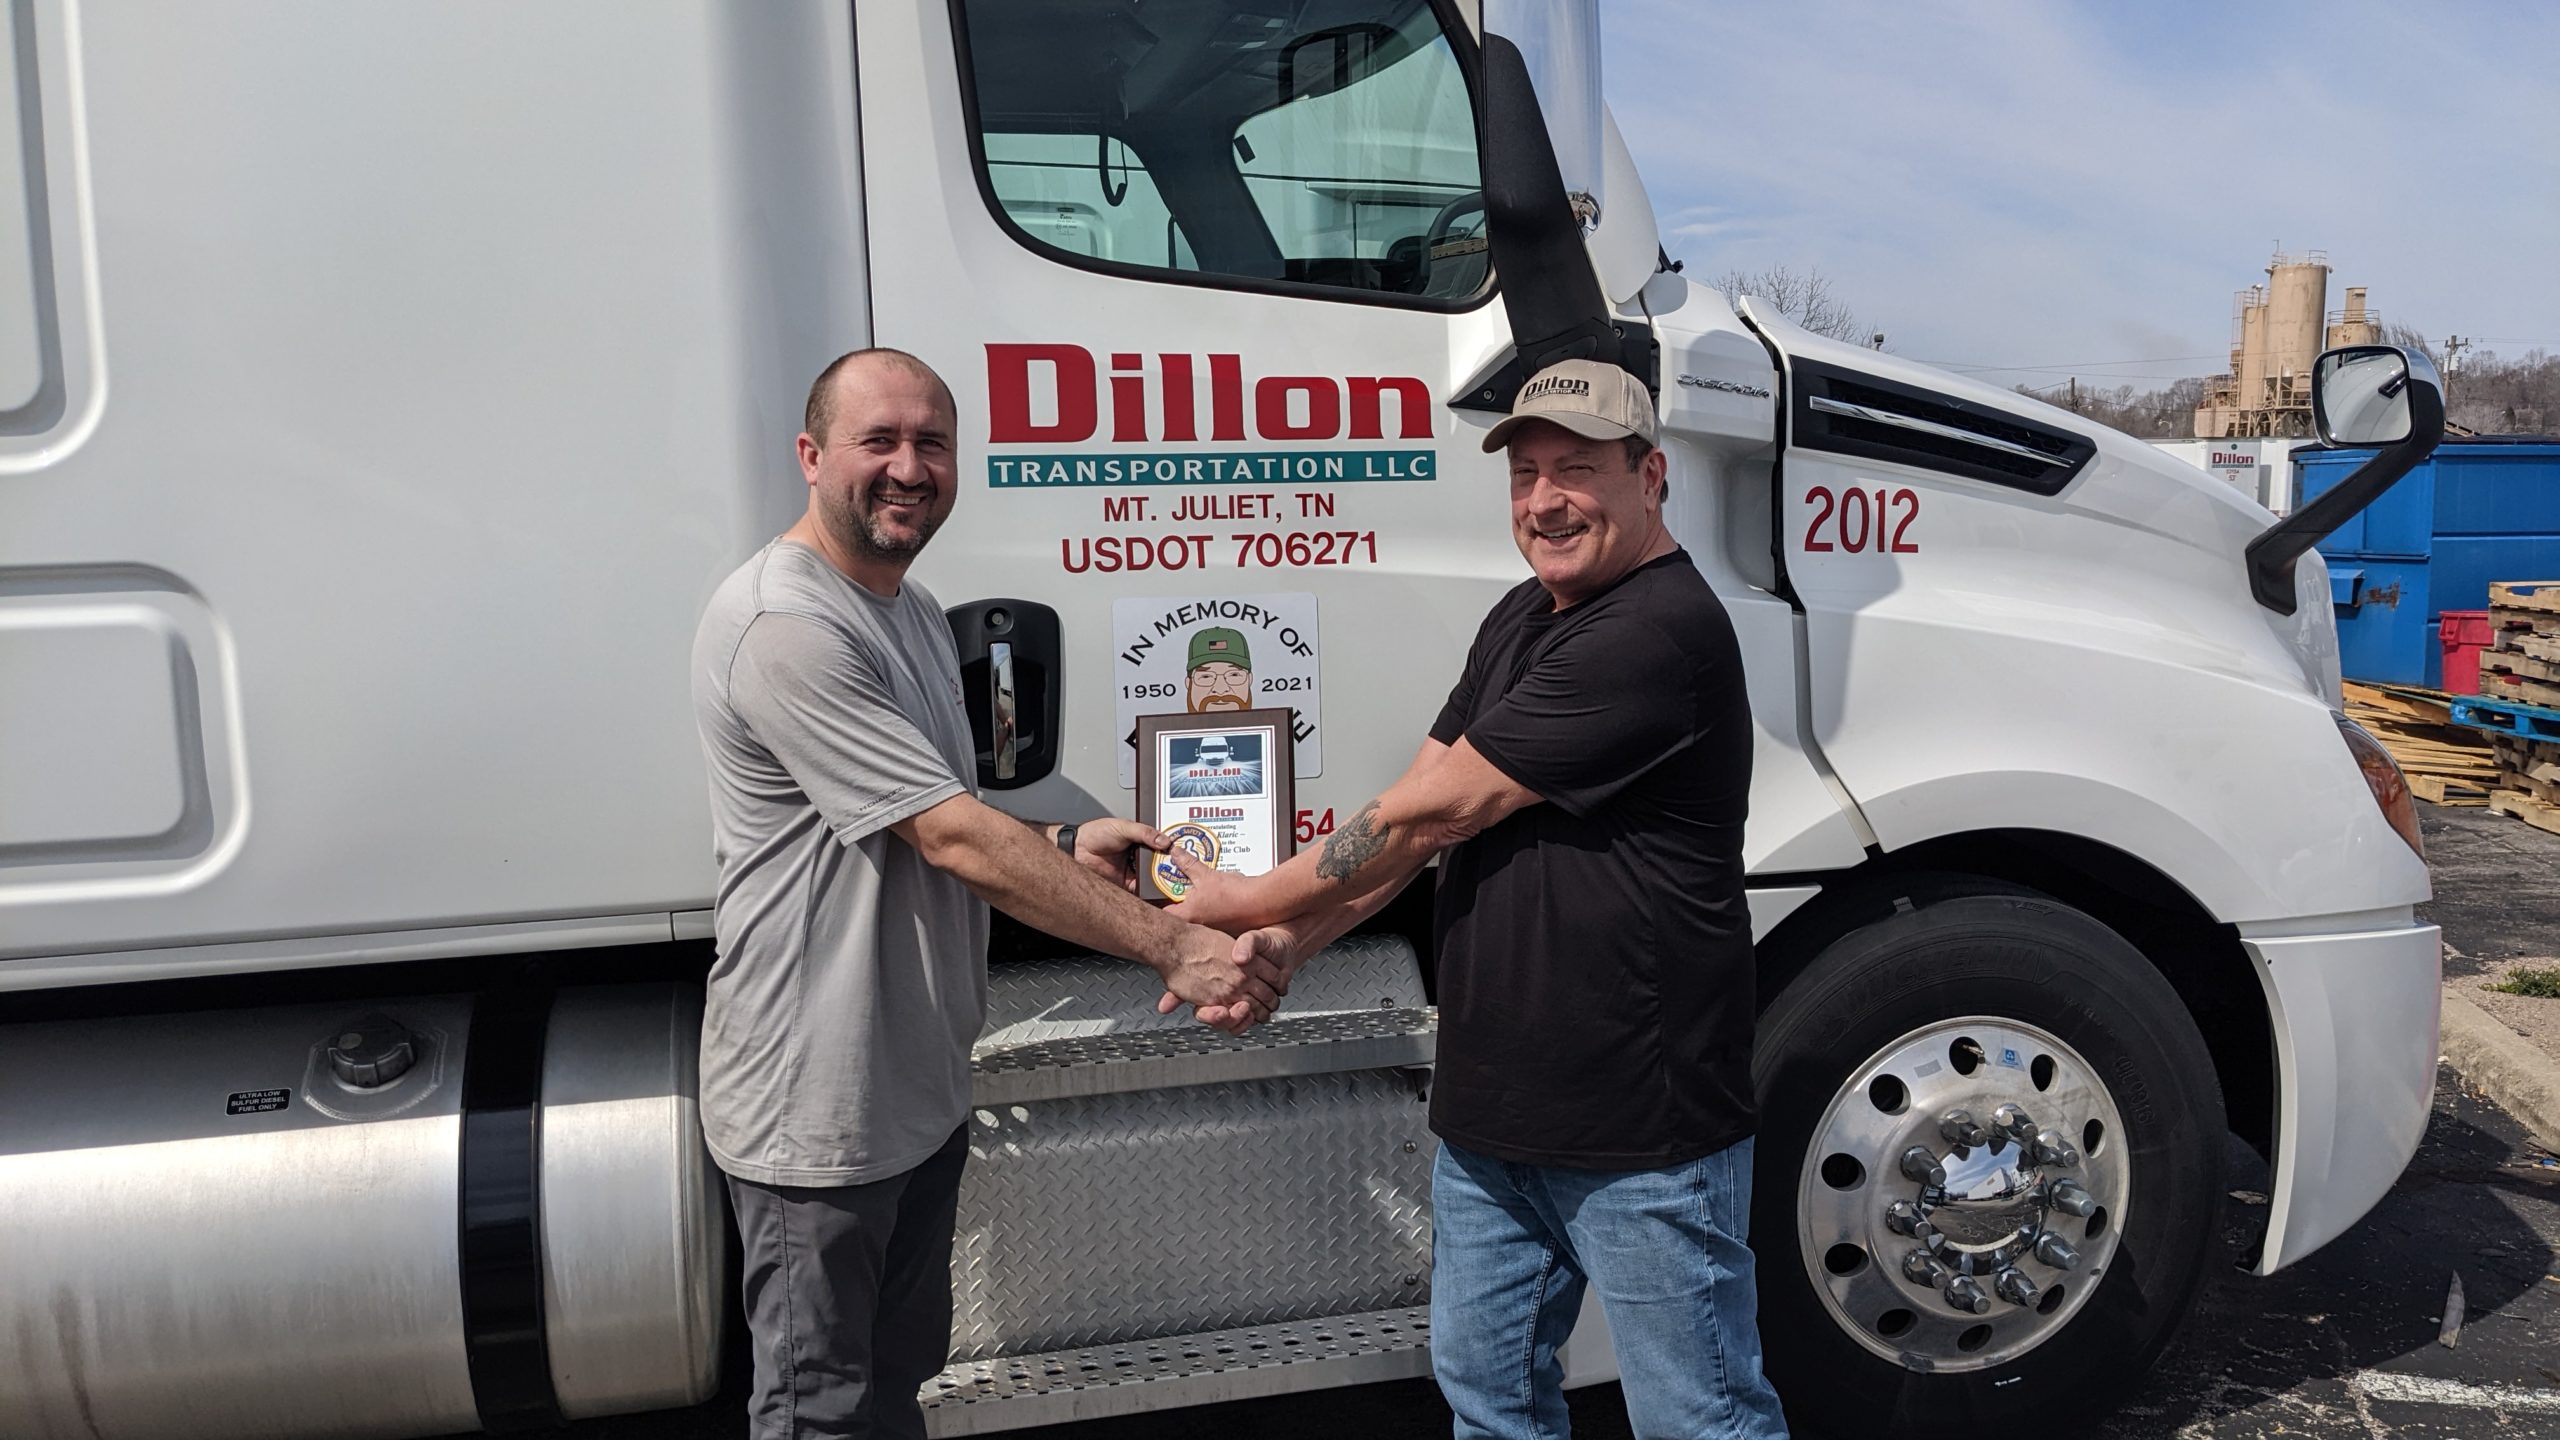 Denis Klaric Being Inducted Into Dillon Transportation's Million Mile Club